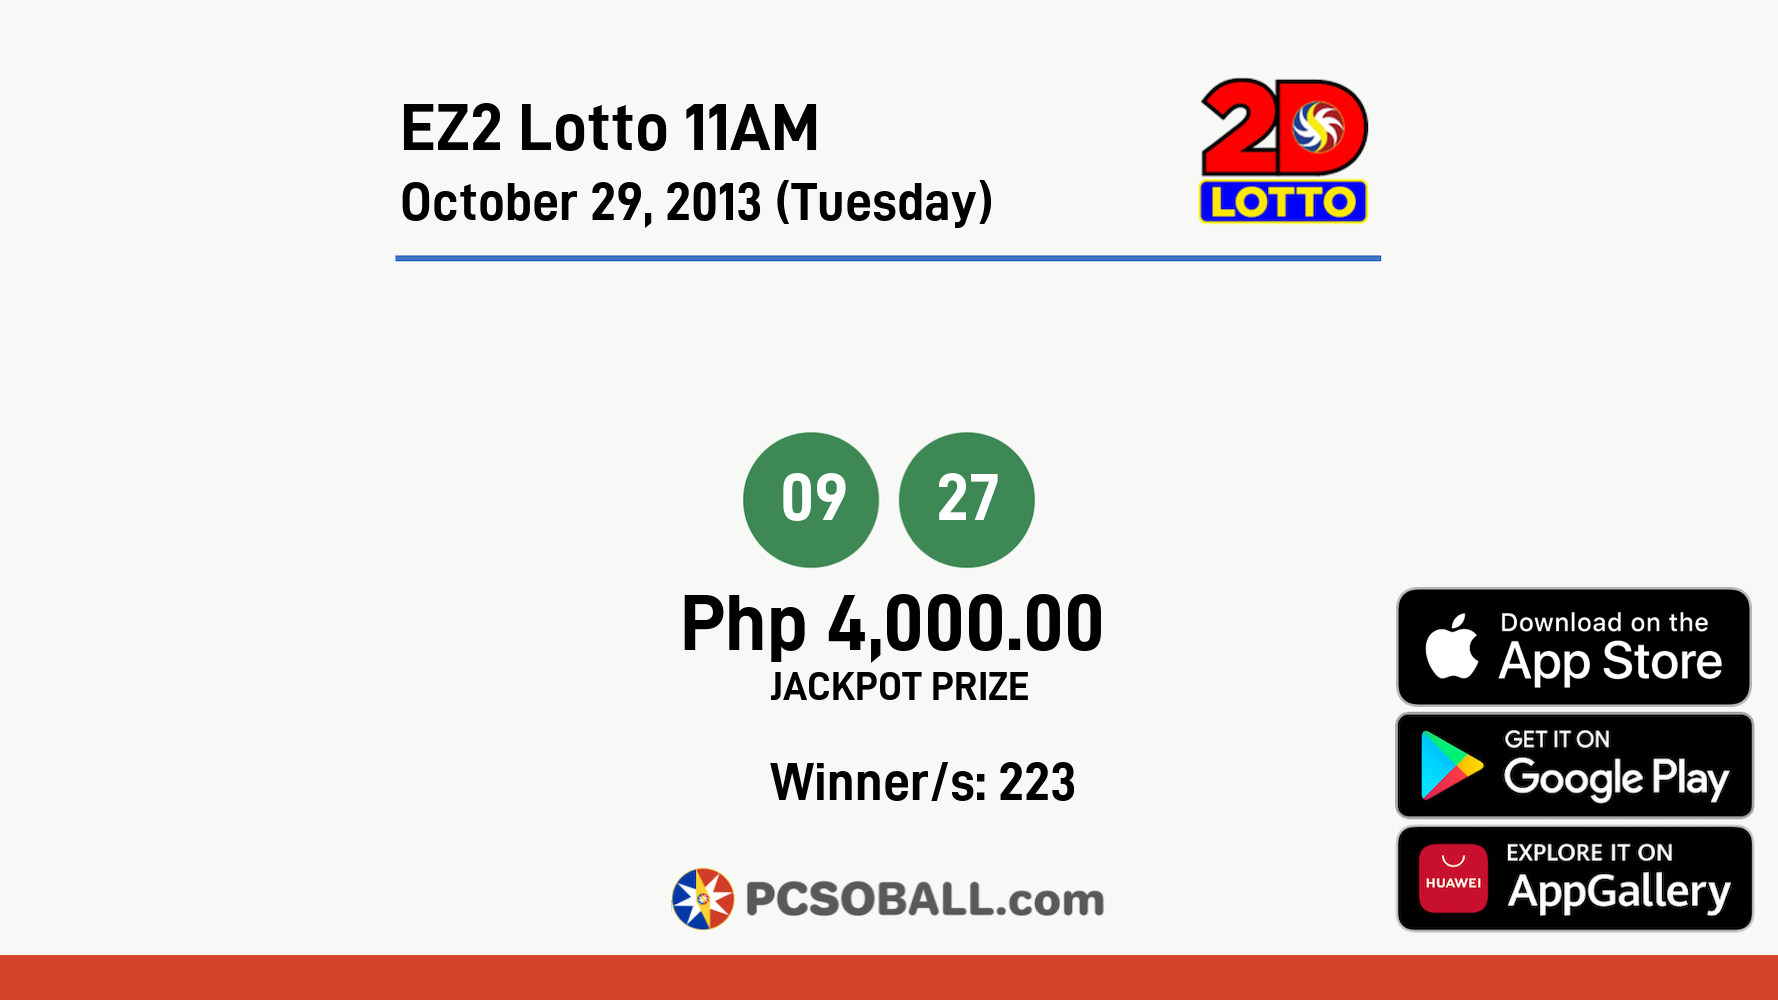 EZ2 Lotto 11AM October 29, 2013 (Tuesday) Result